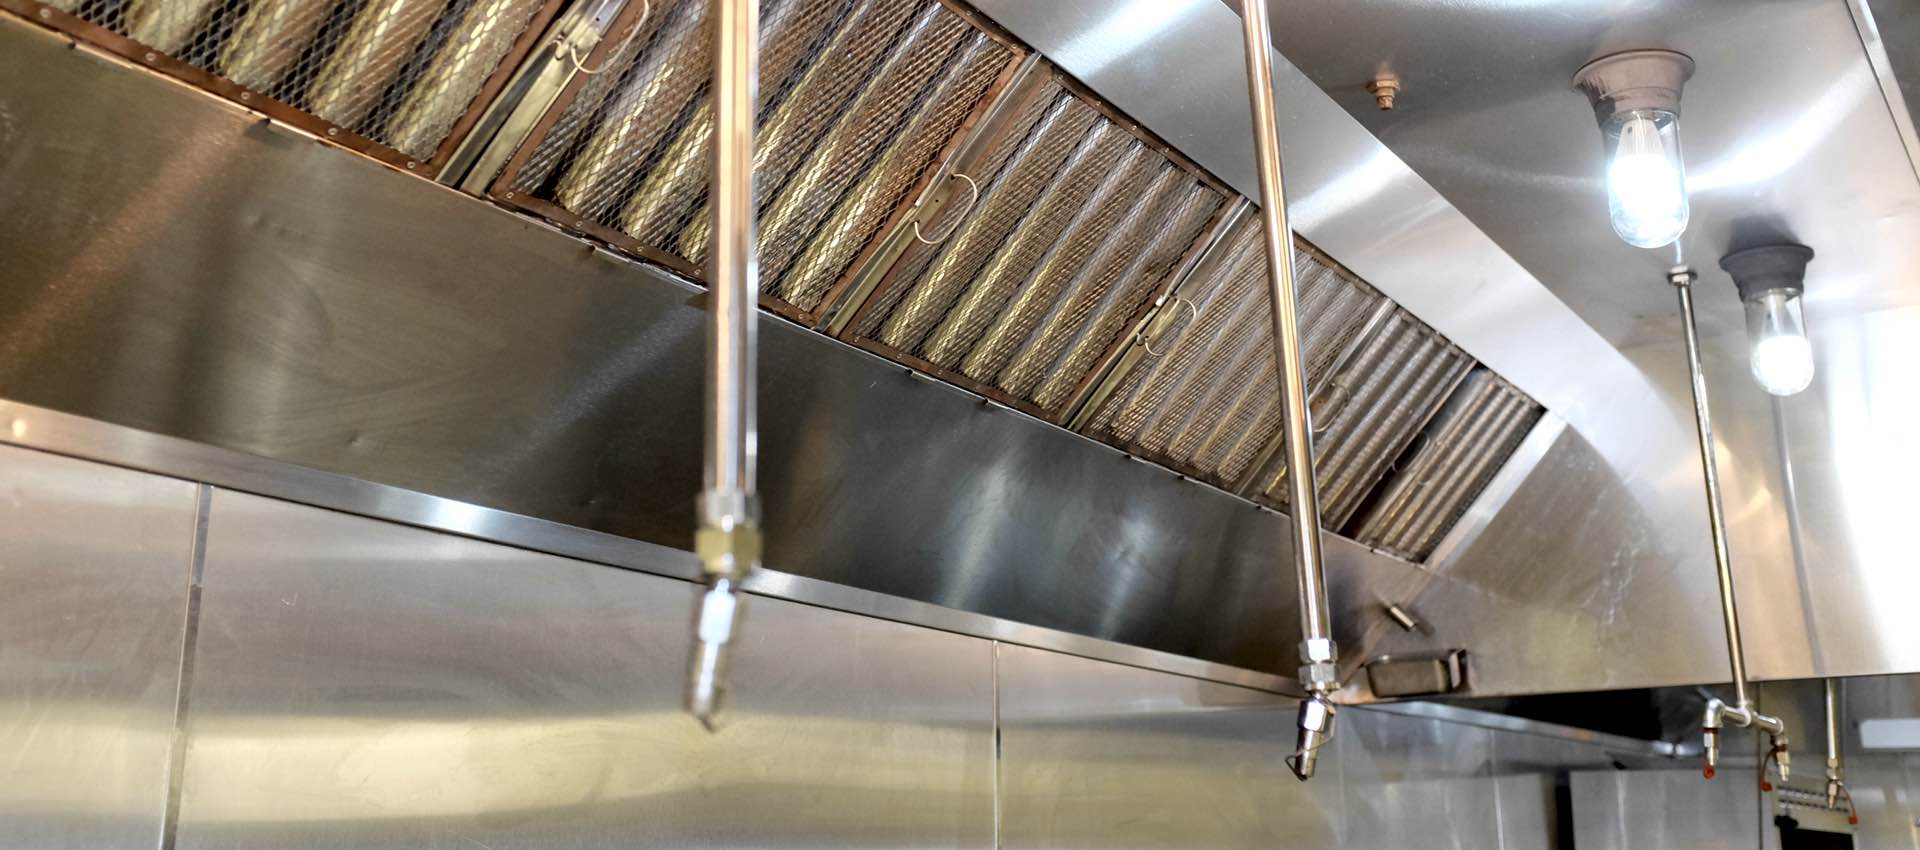 Schedule of Commercial Kitchen Extractor Components